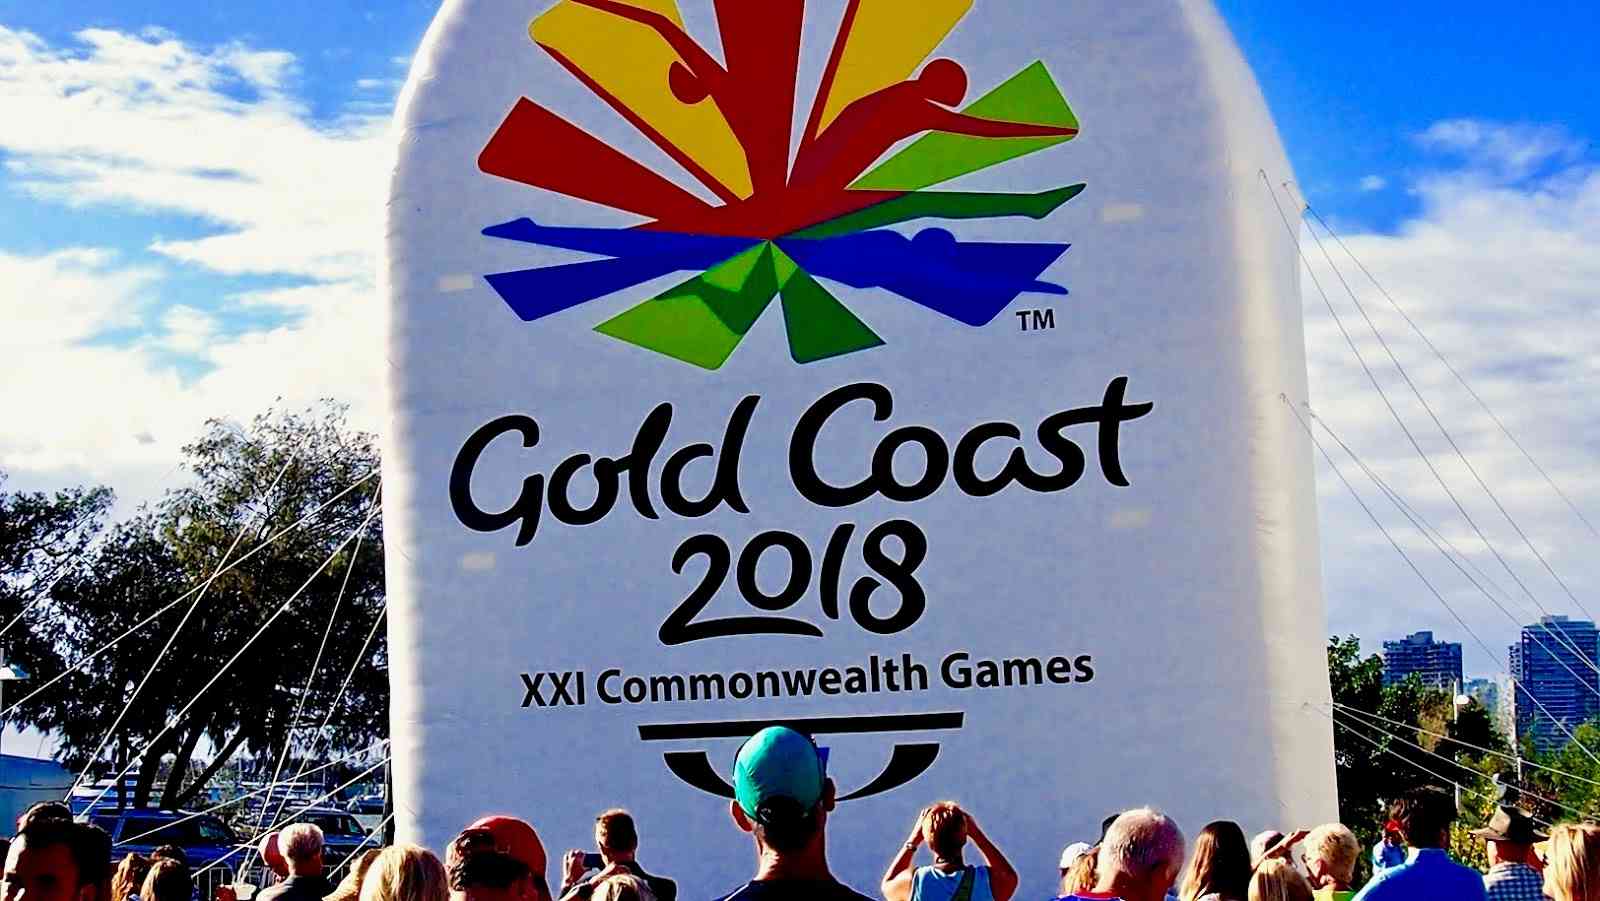 India announced Athletic Team for the Commonwealth Games, gold cost